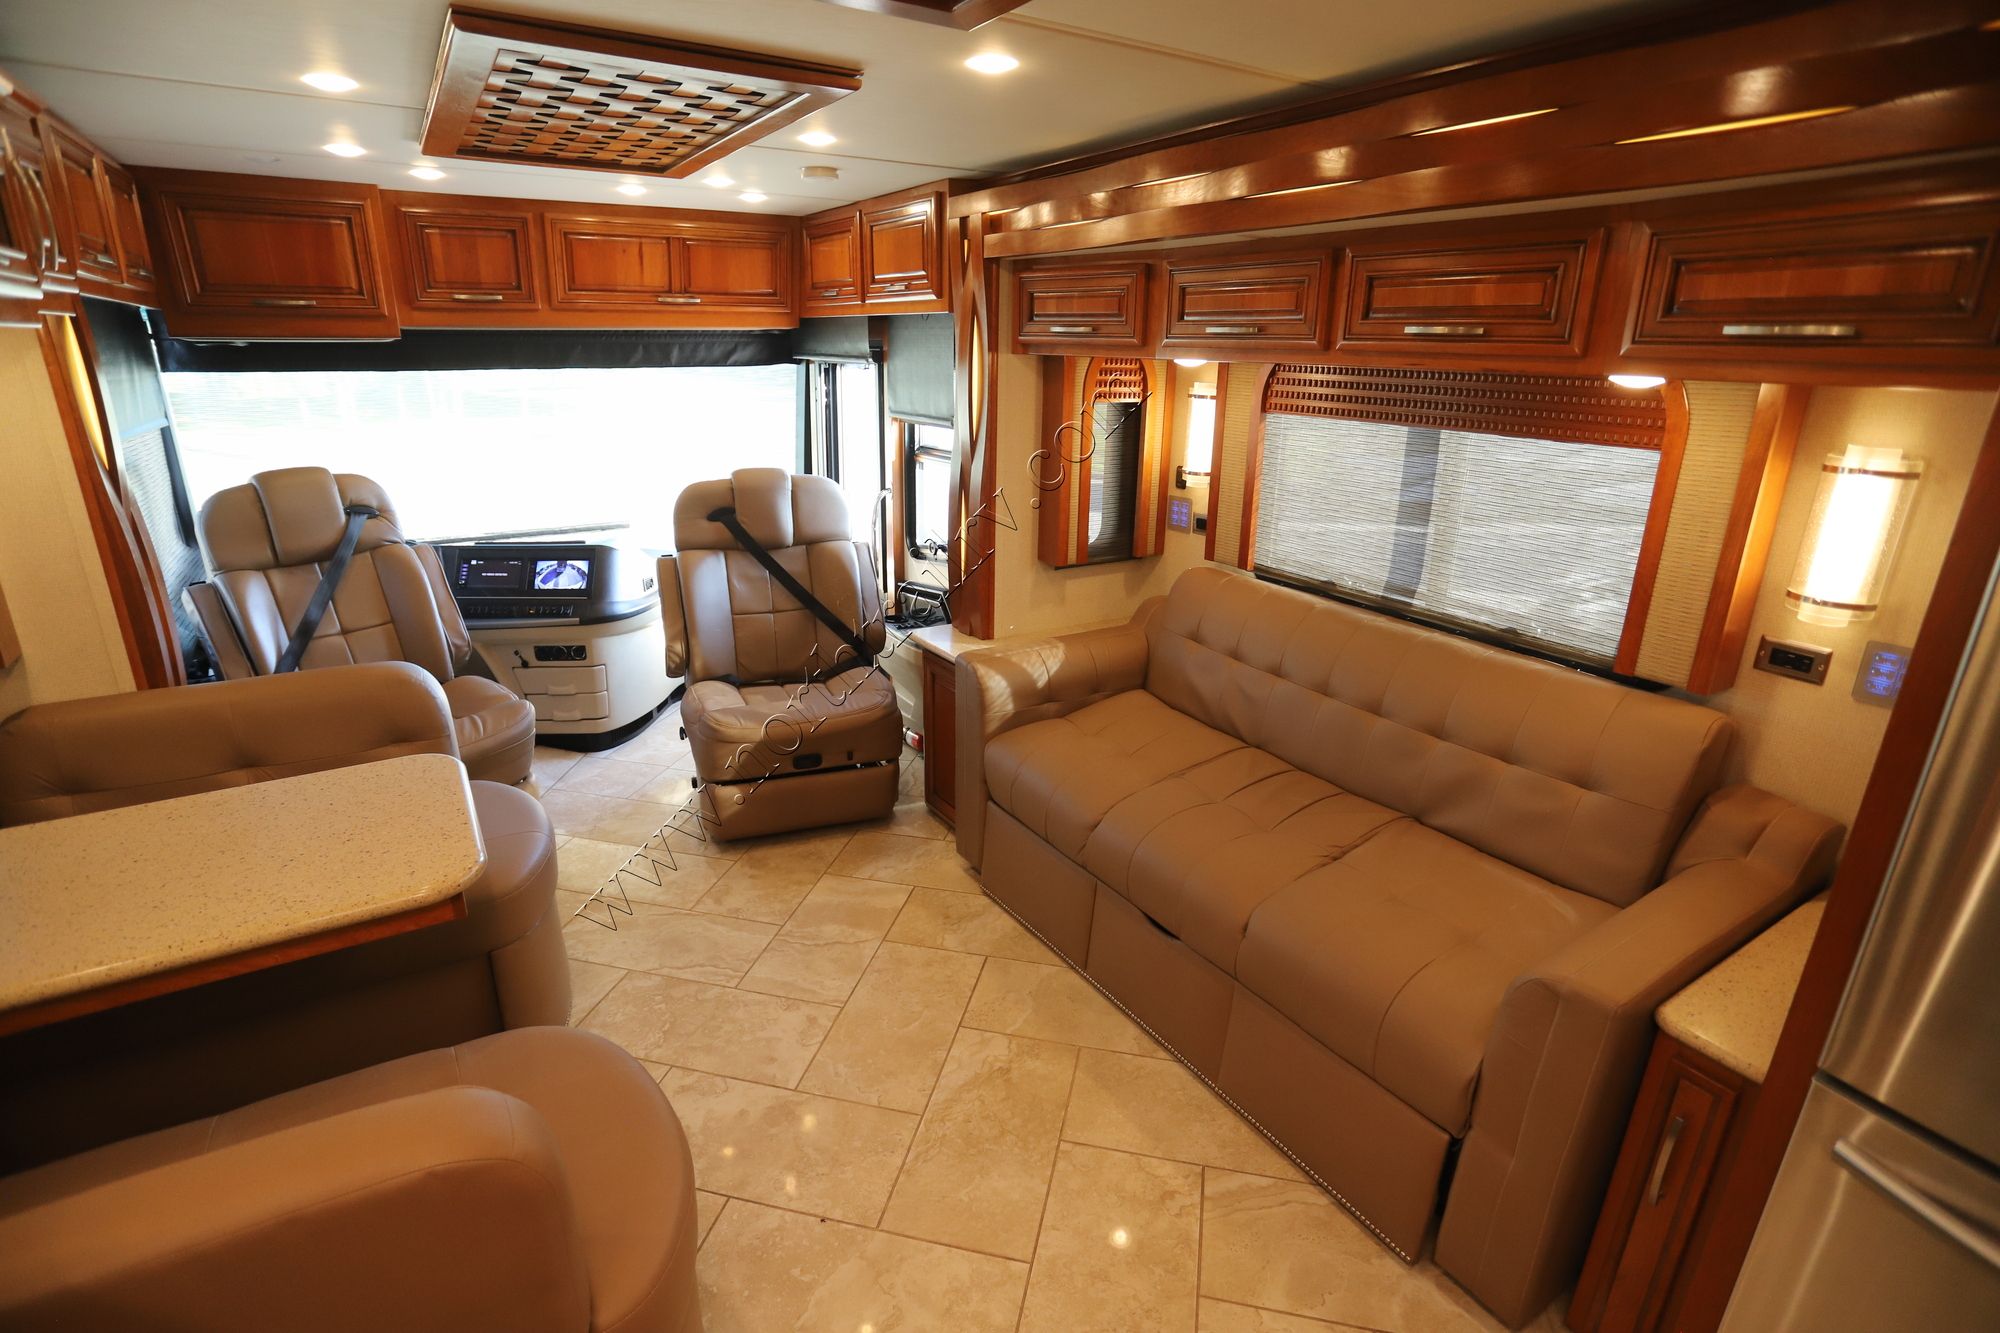 Used 2018 Newmar New Aire 3341 Class A  For Sale